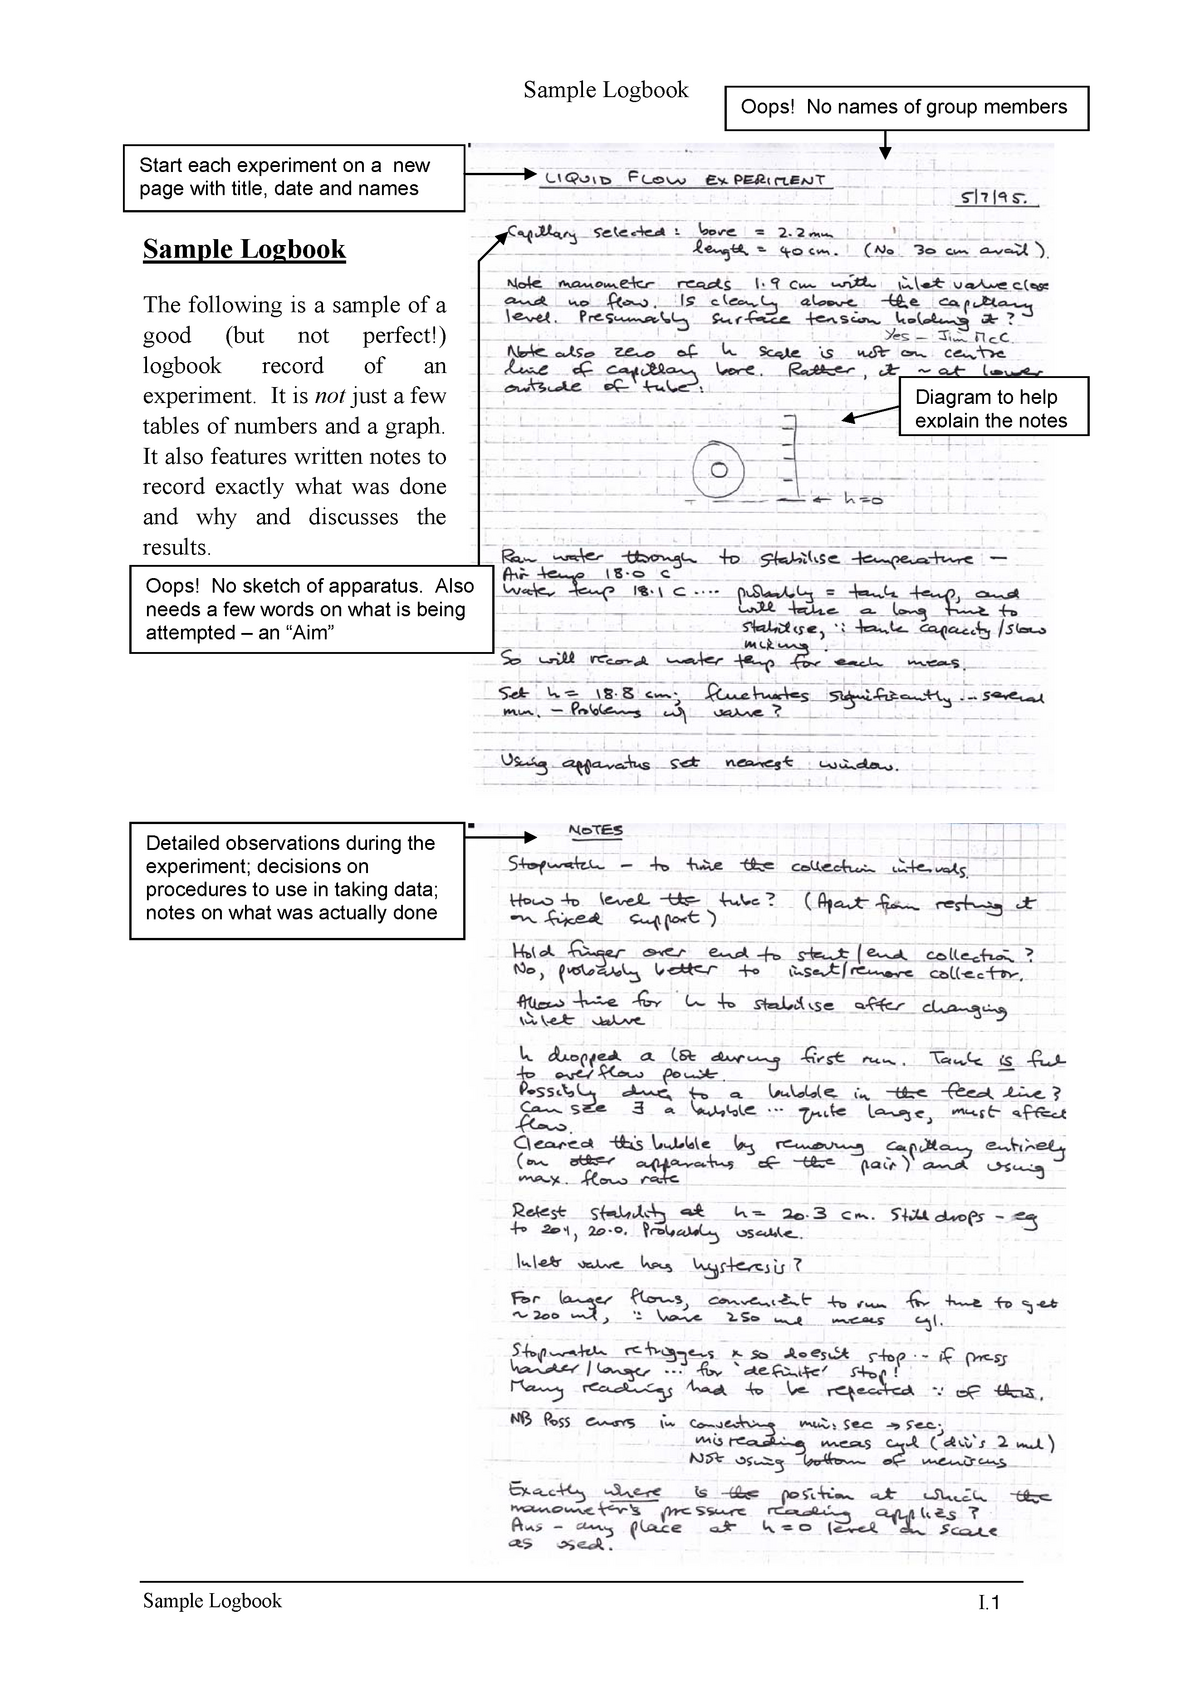 Sample Log Book - Sample Logbook I. 1 Sample Logbook The following is a